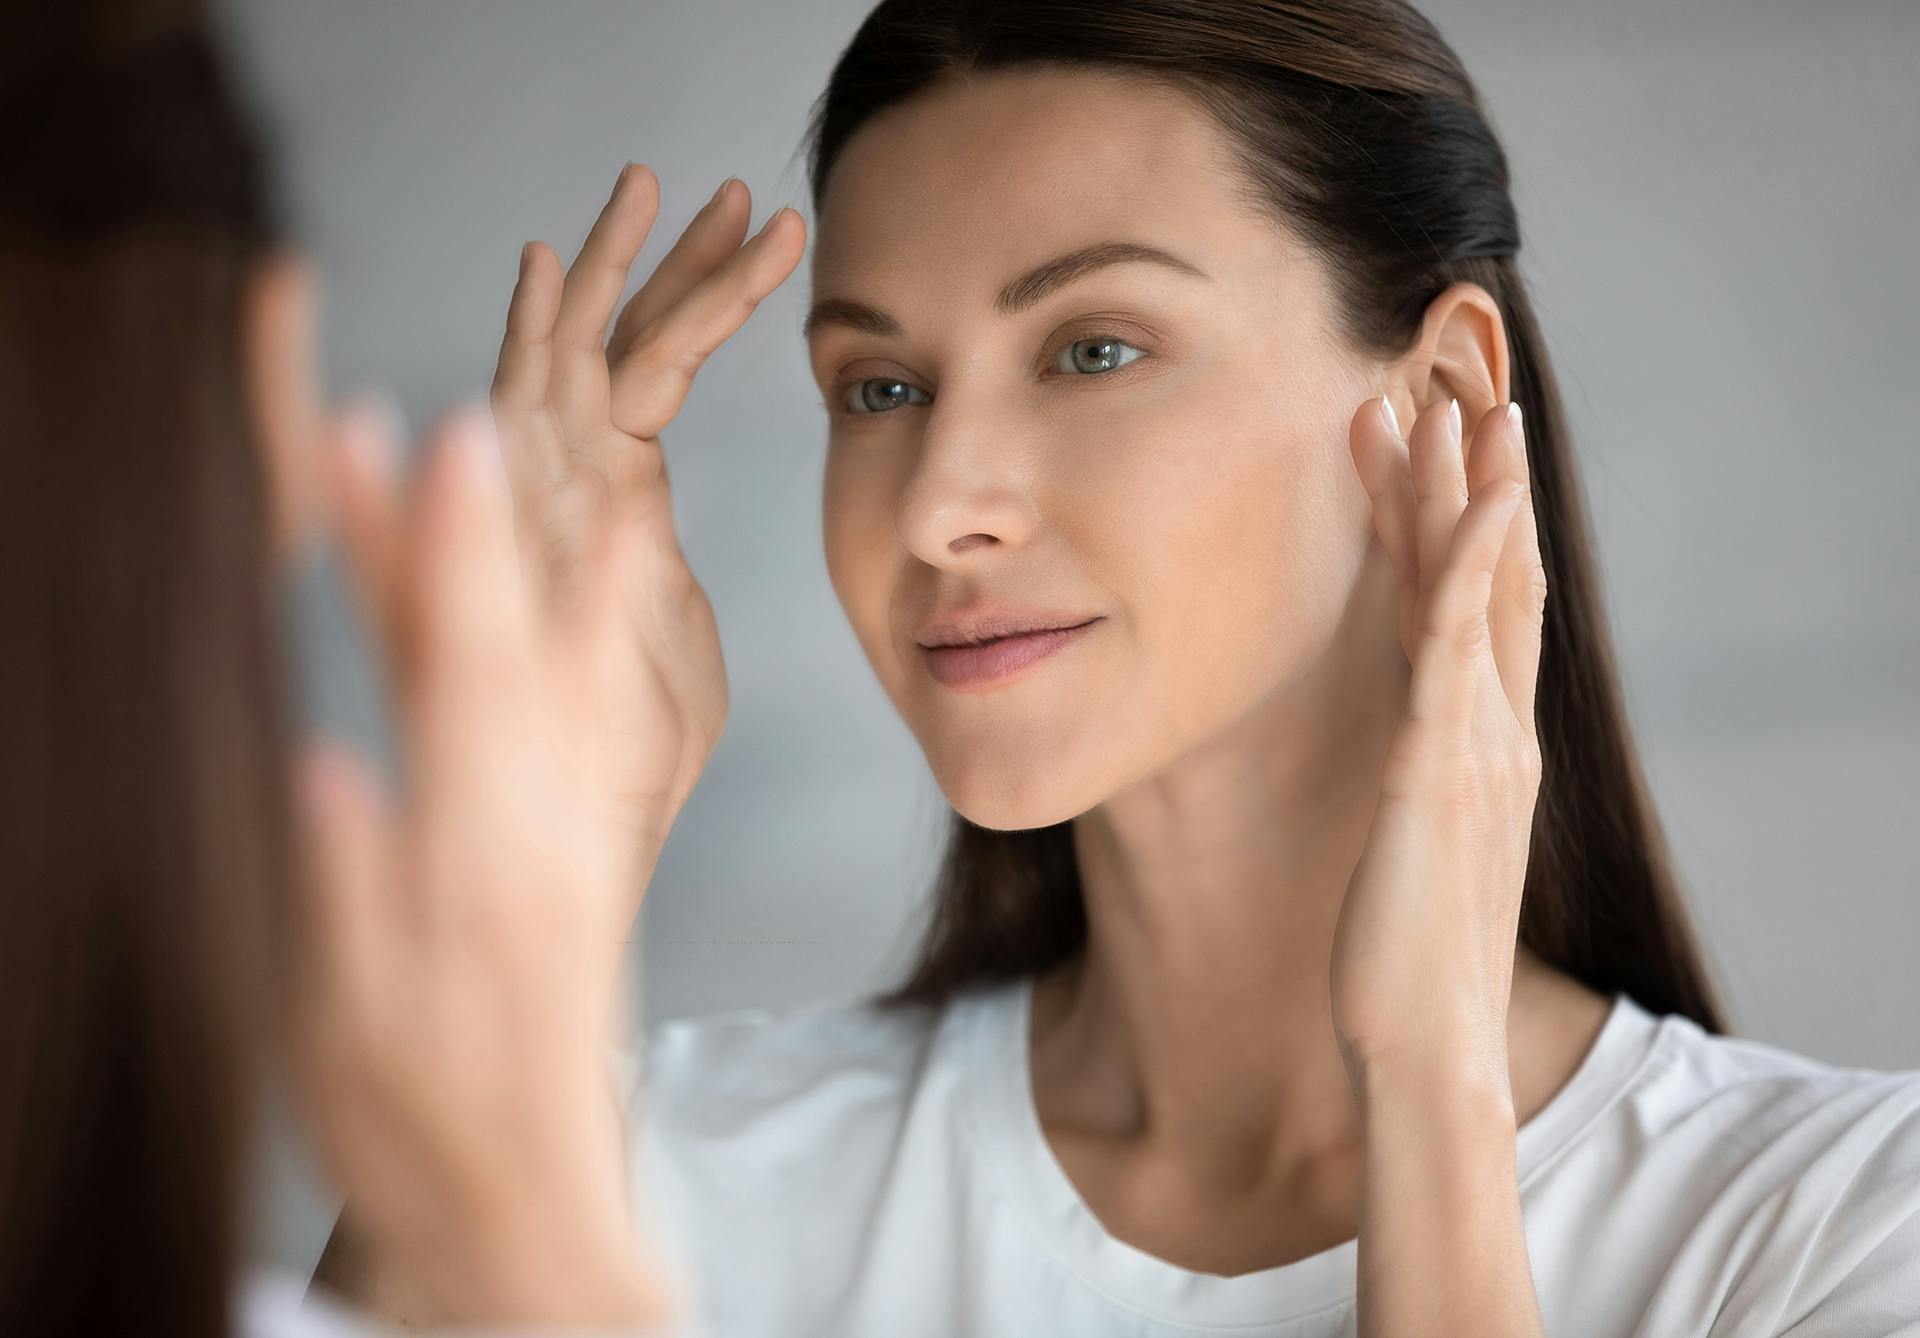 Woman looking in the mirror with her hands near her face